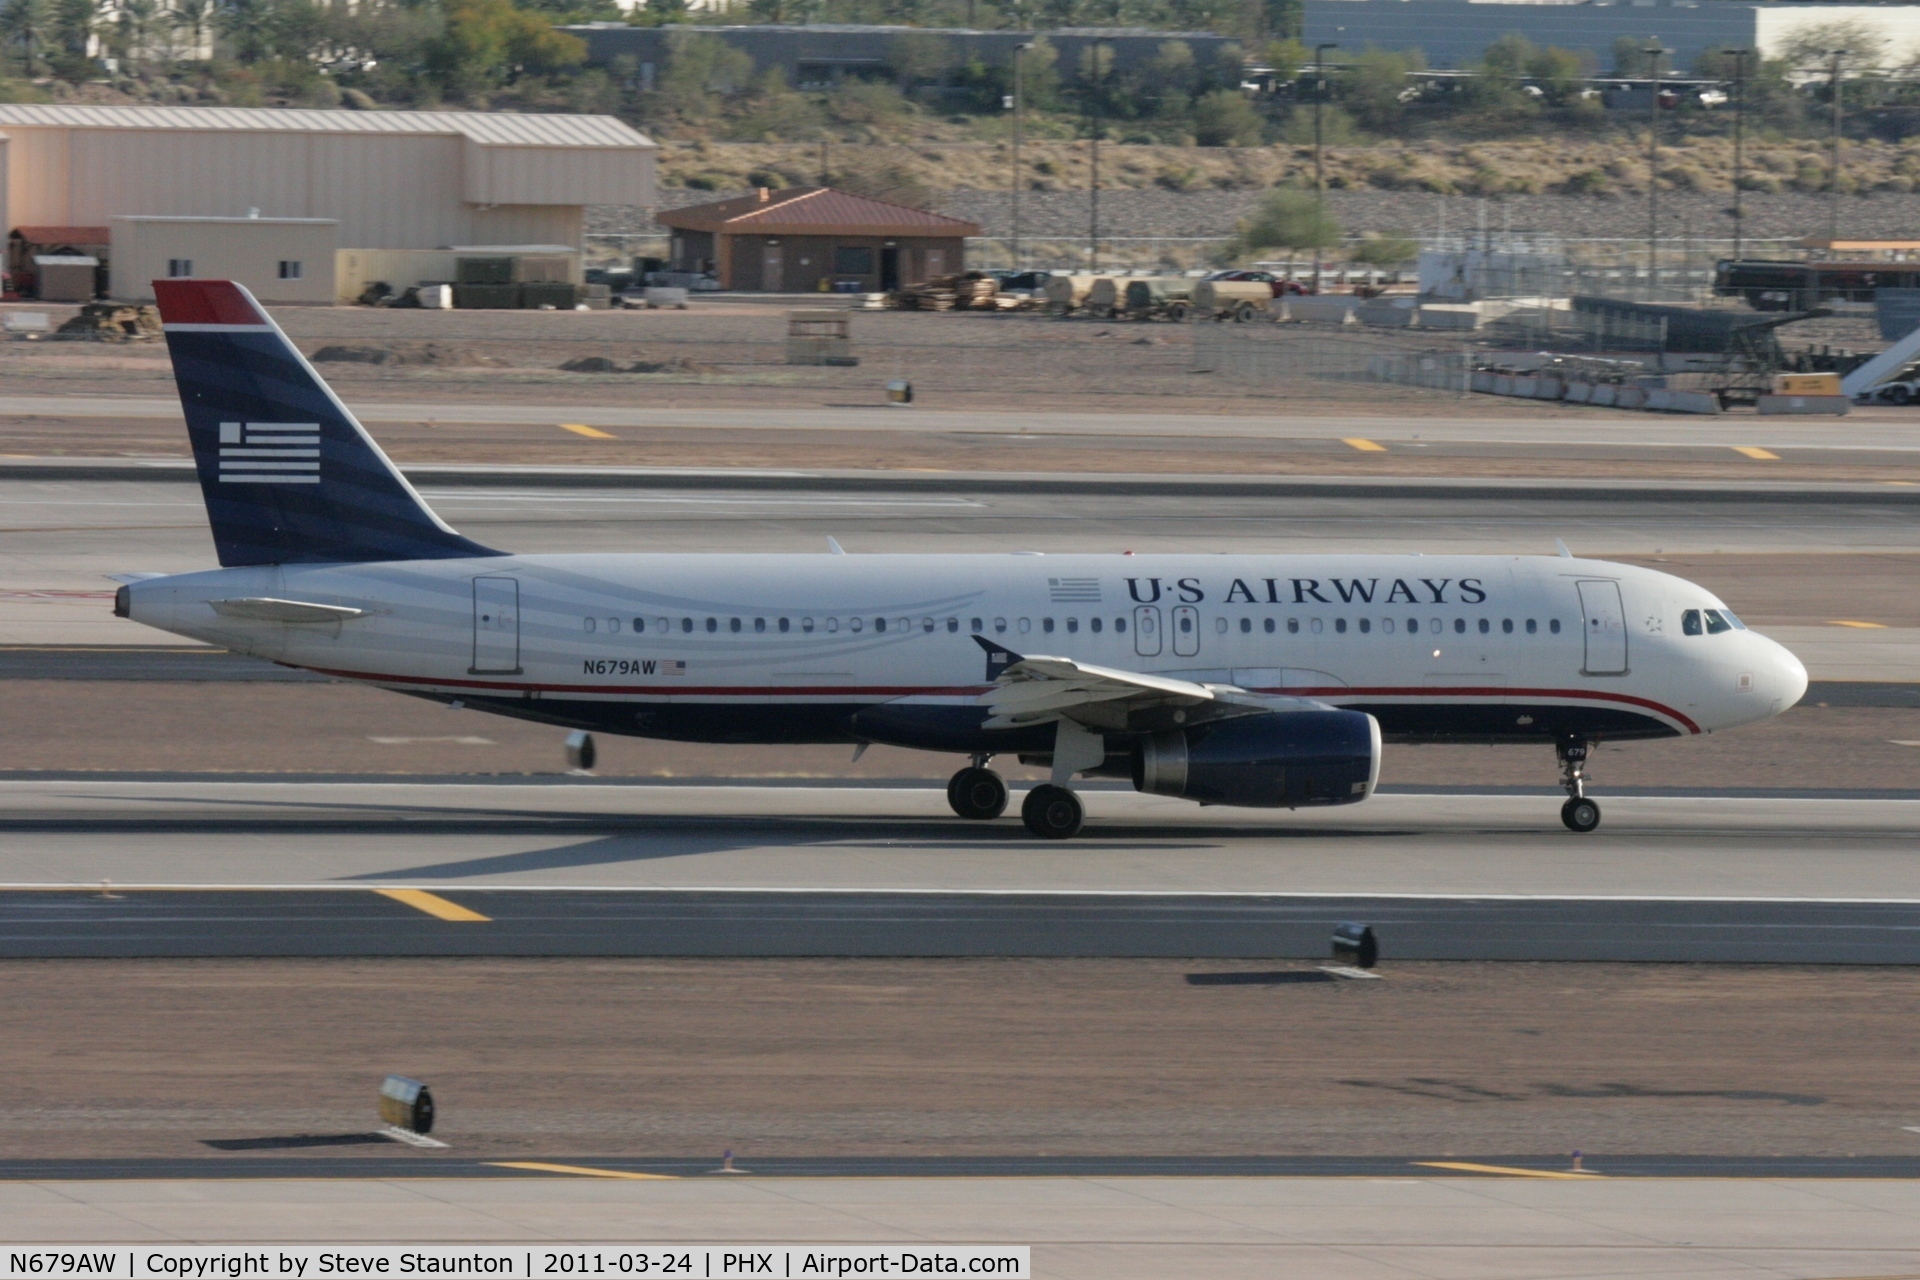 N679AW, 2005 Airbus A320-232 C/N 2613, Taken at Phoenix Sky Harbor Airport, in March 2011 whilst on an Aeroprint Aviation tour